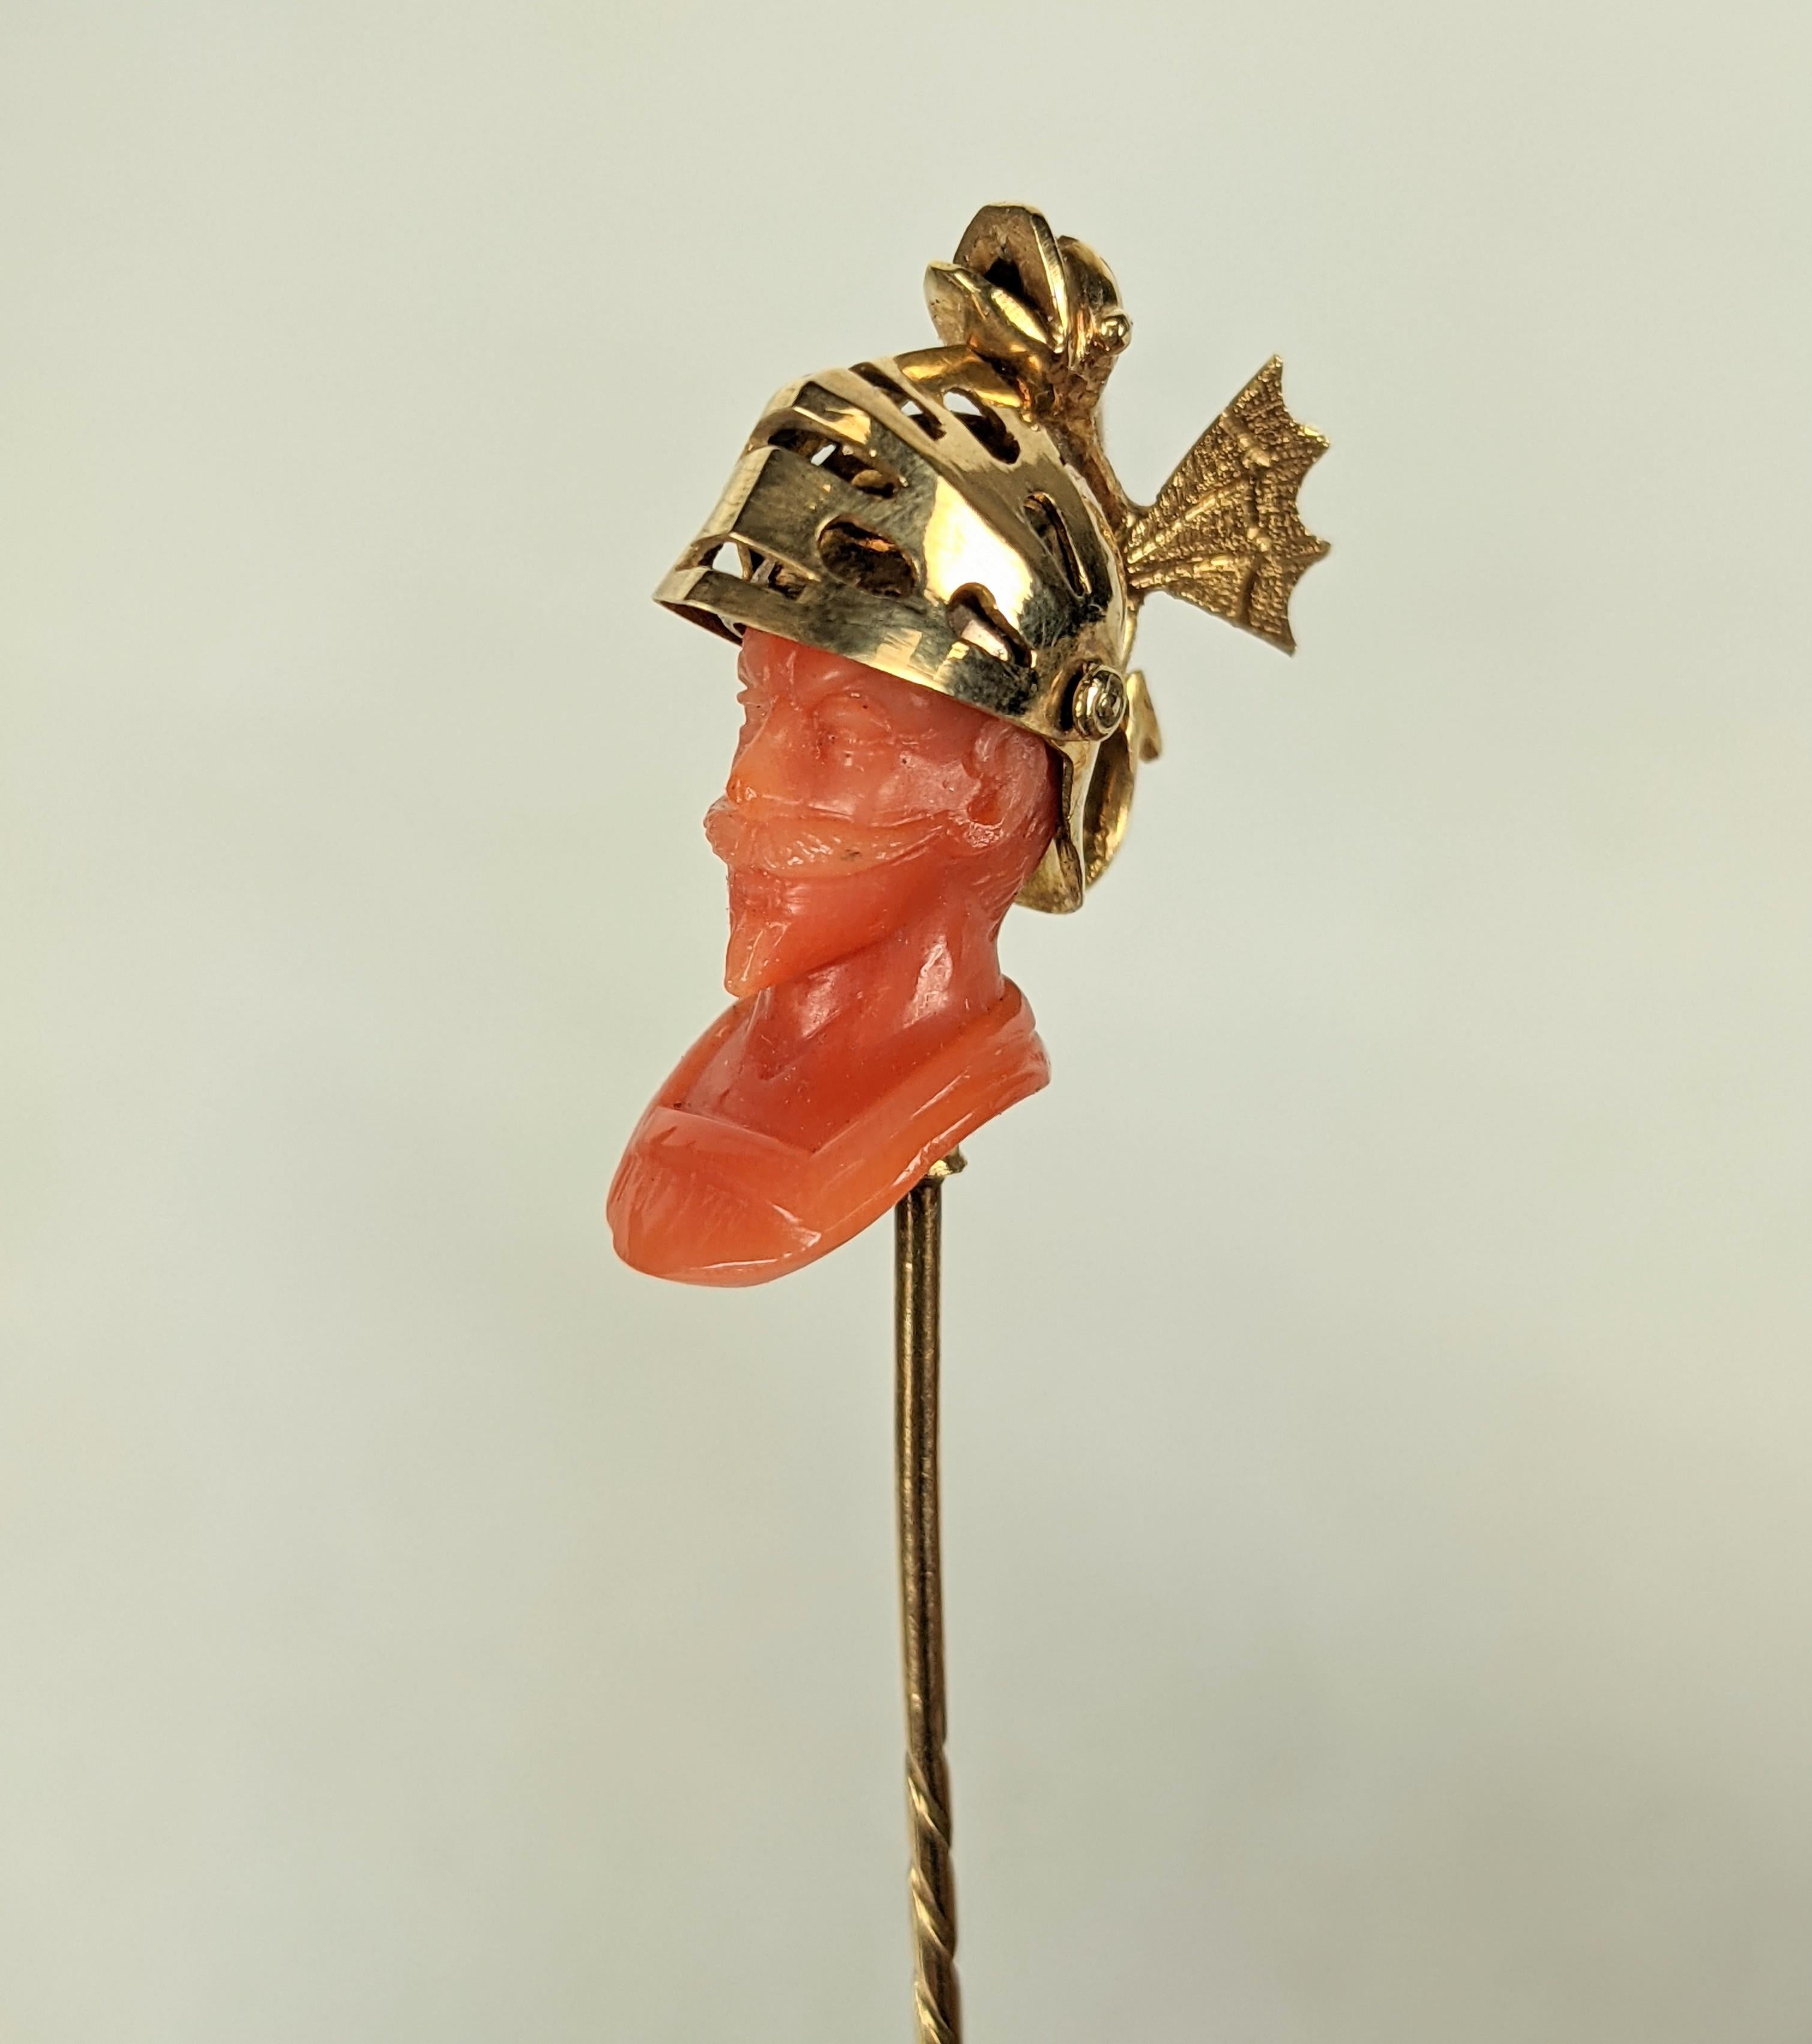 Exceptional Collector Quality Tiffany 19th Century Carved Coral Warrior Stickpin with hinged gold helmet which opens with dragon perched on top. Exquisite carving and gold work.
Original Leather Box with velvet interior from 550 Broadway , NY. 